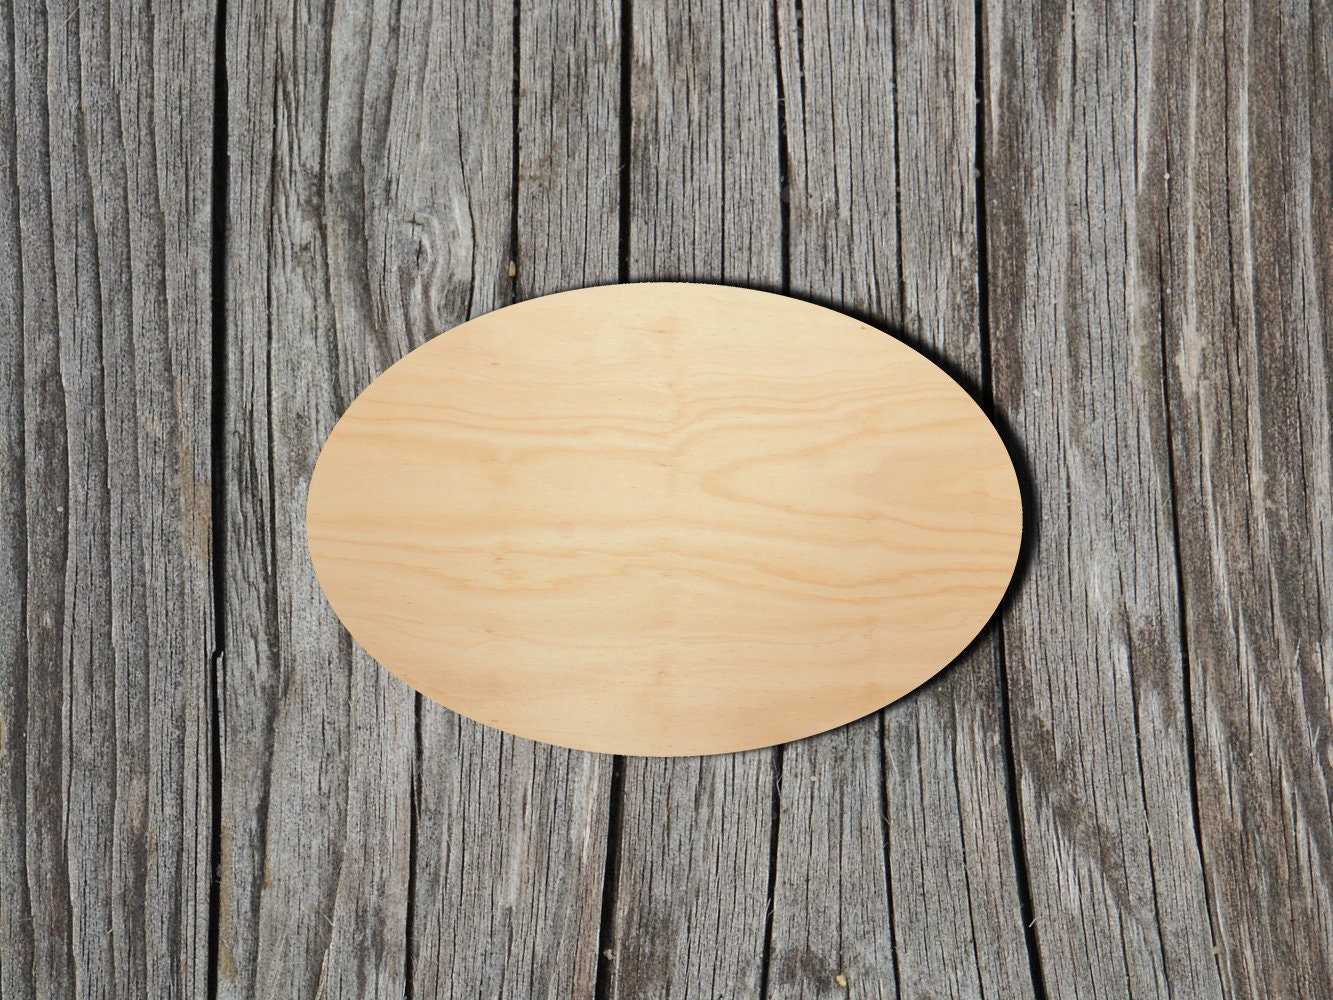 Wood Plaque - Fancy Oval - 9 x 12 inches - The Compleat Sculptor - The  Compleat Sculptor